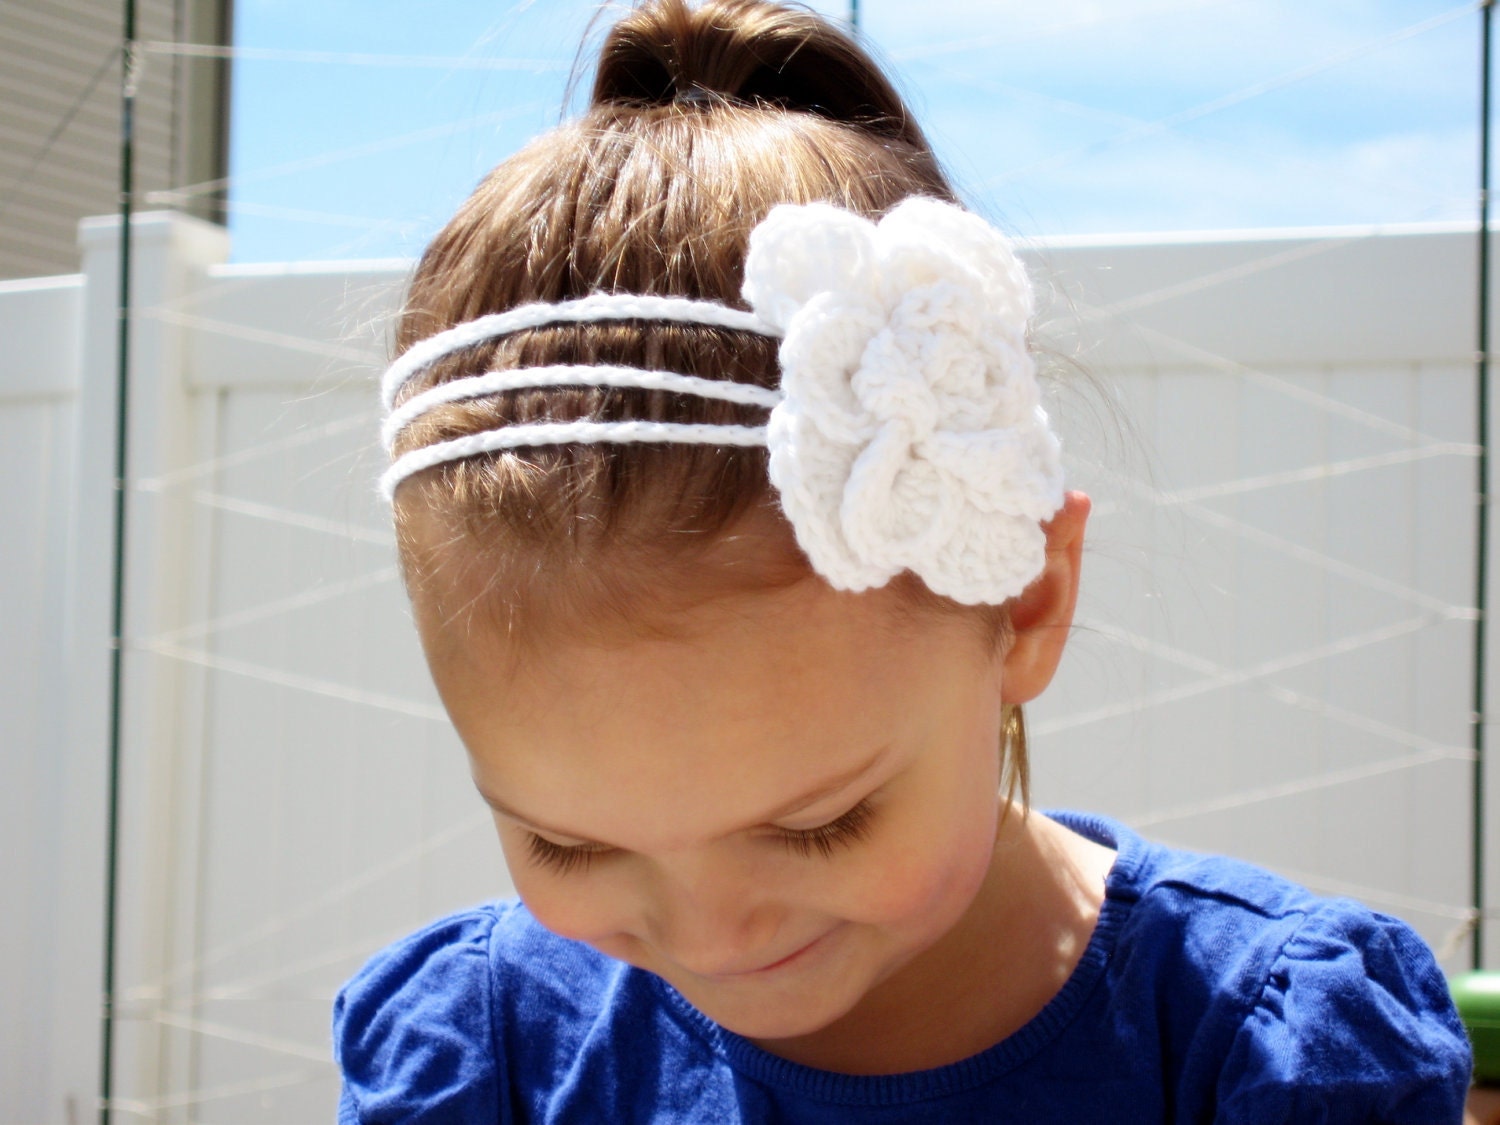 White Crocheted Headband with Rose Flower Clip Set, choose your size- adult,child, and baby sizes available